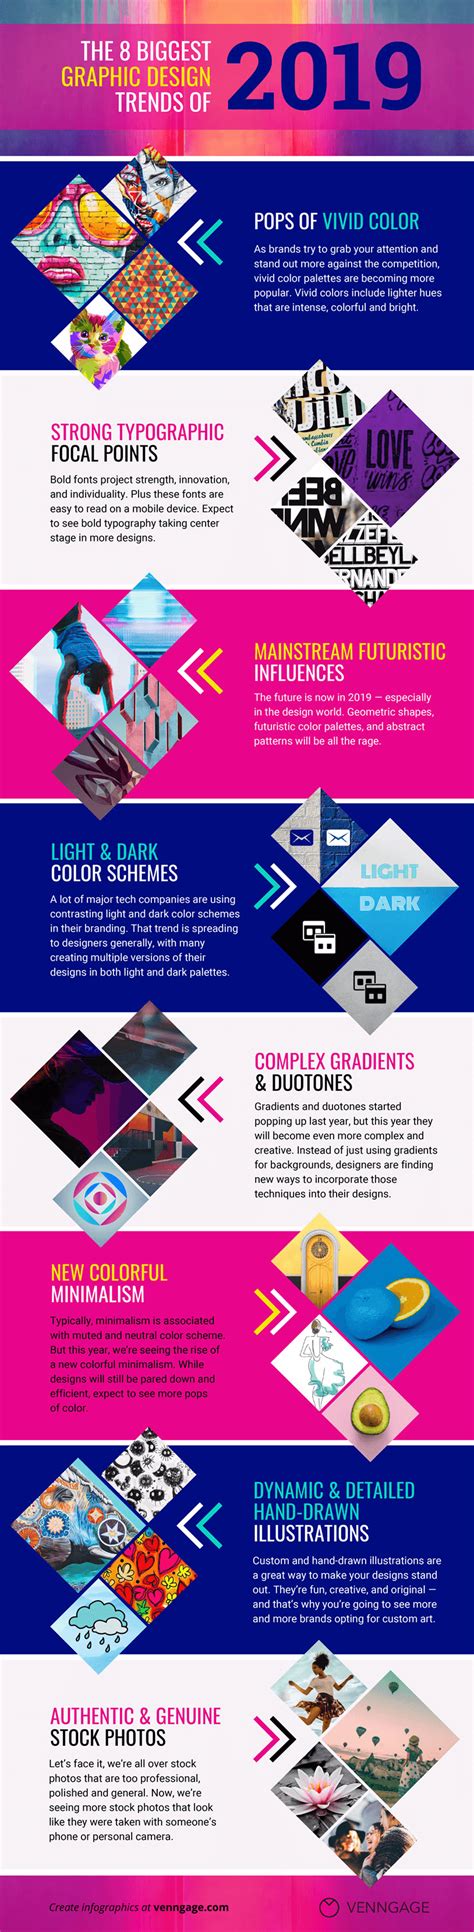 New Top 8 Graphic Design Trends 2019 Cgfrog